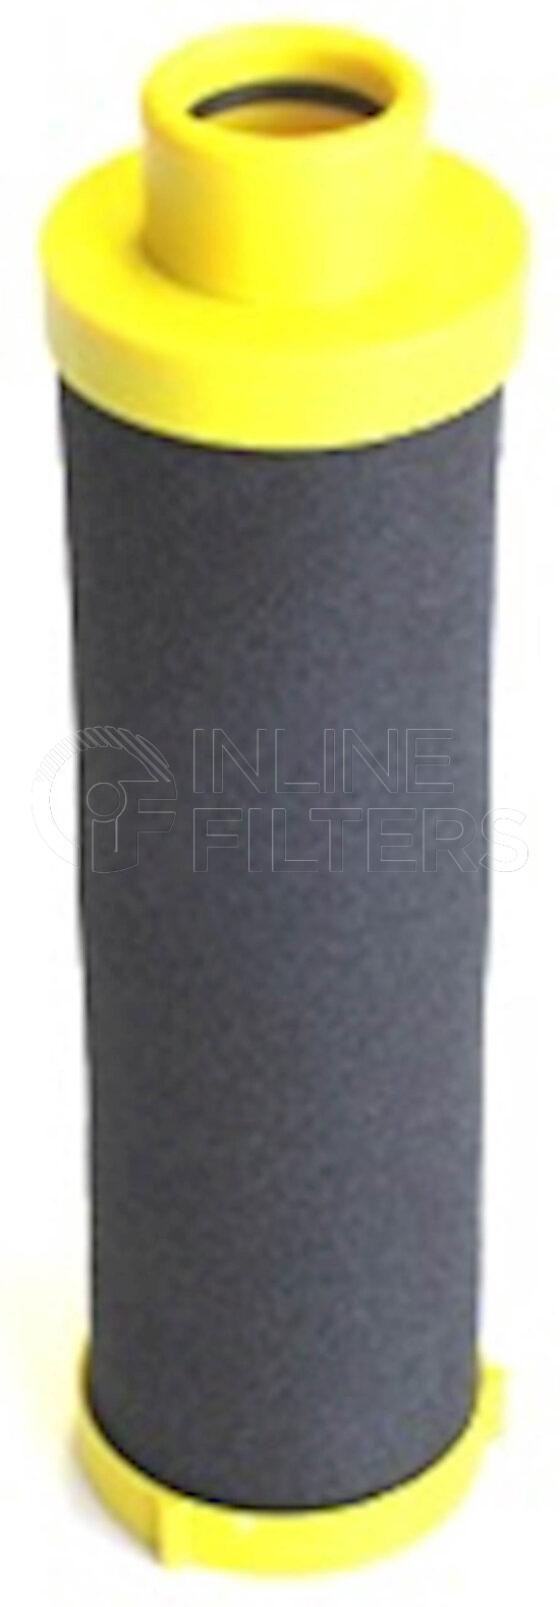 Inline FA18352. Air Filter Product – Compressed Air – Cartridge Product Air filter product